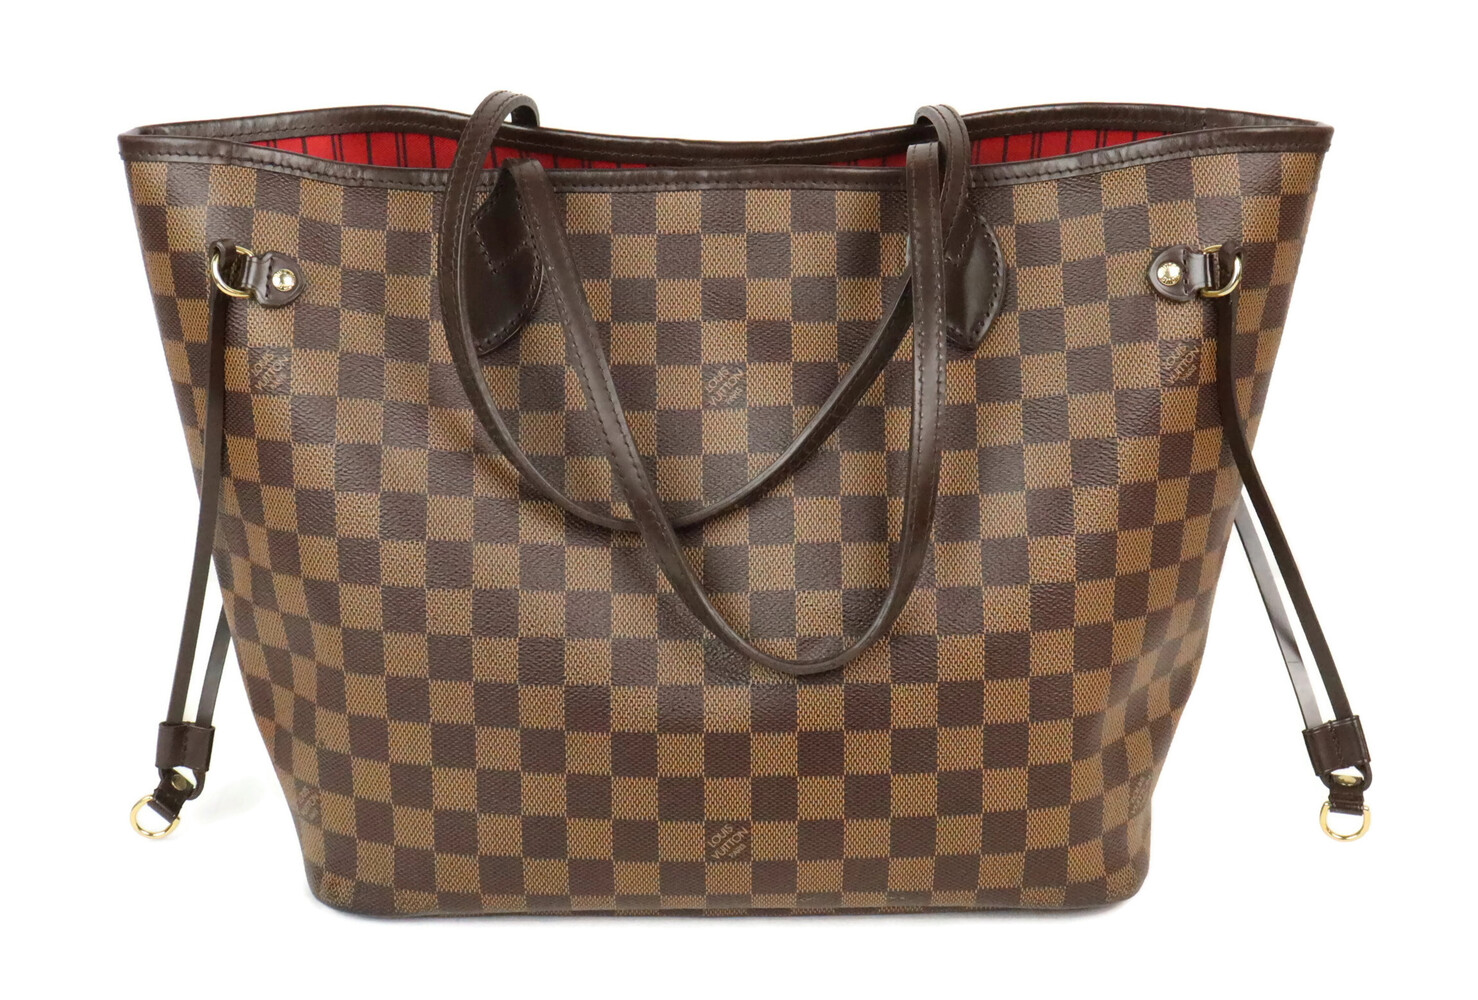 Authentic Louis Vuitton Damier Ebene Luxury Leather Neverfull MM Hand Bag 